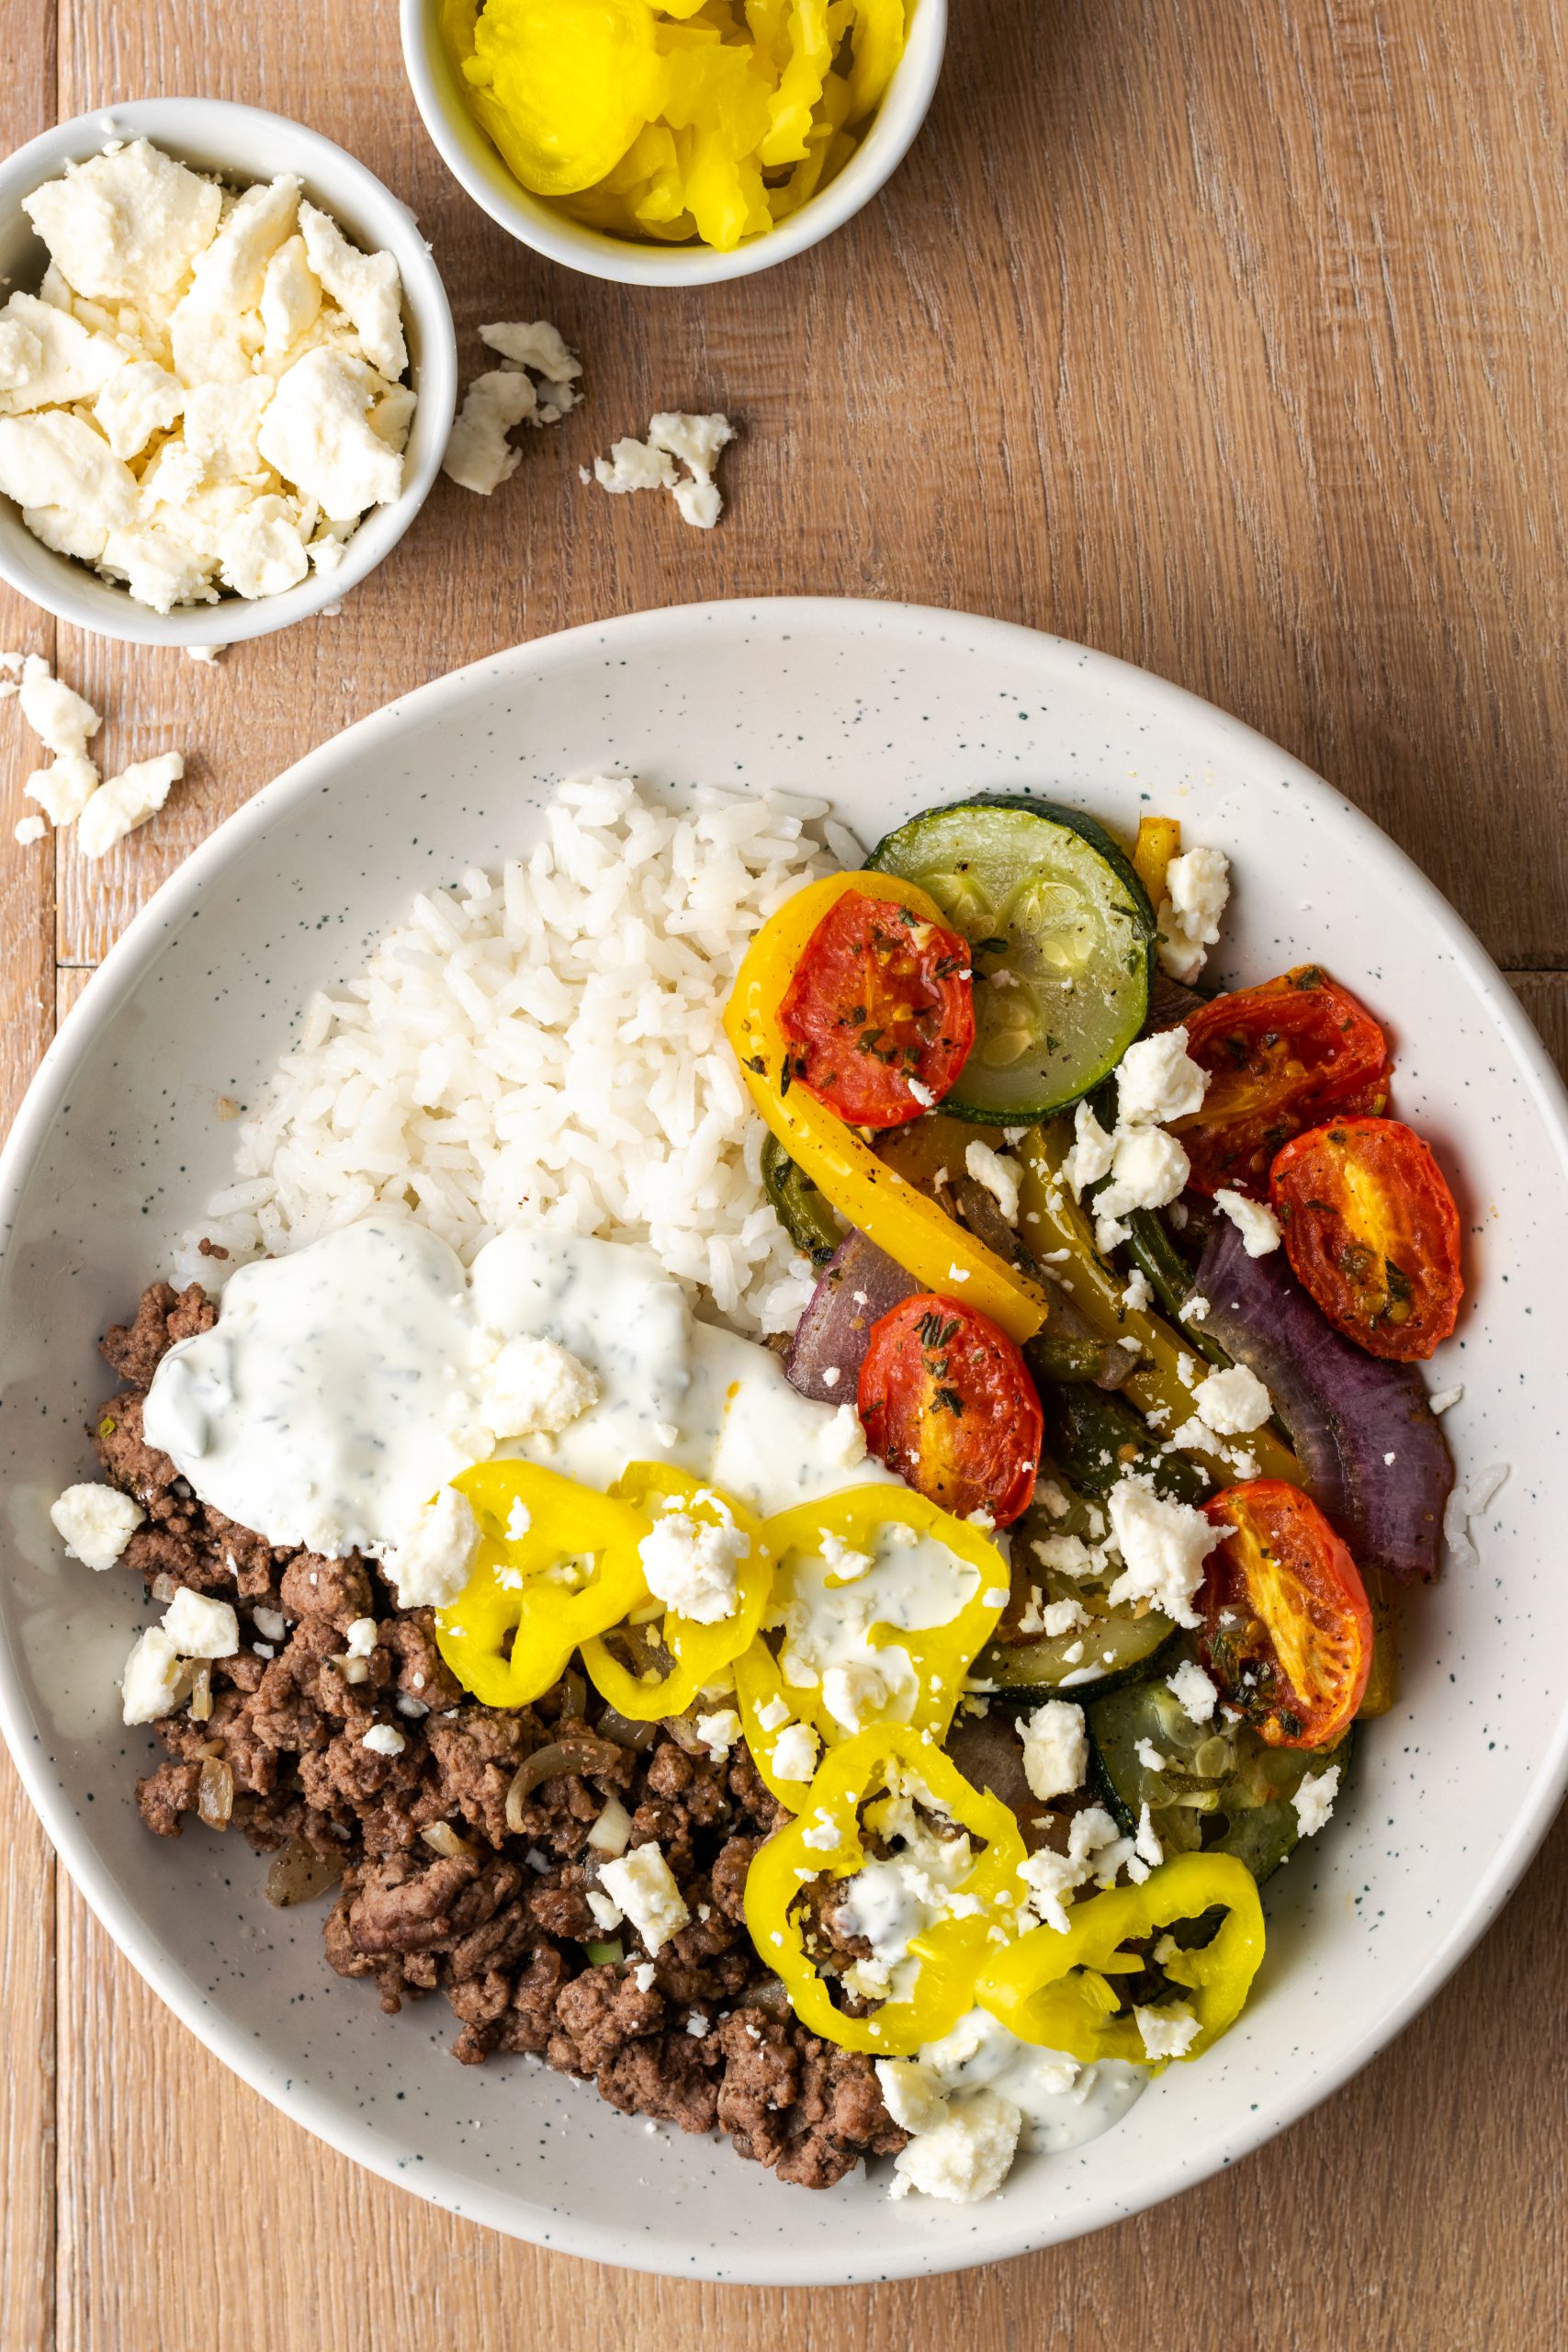 Ground beef gyro bowls shown with banana peppers, roasted vegetables, and feta cheese.